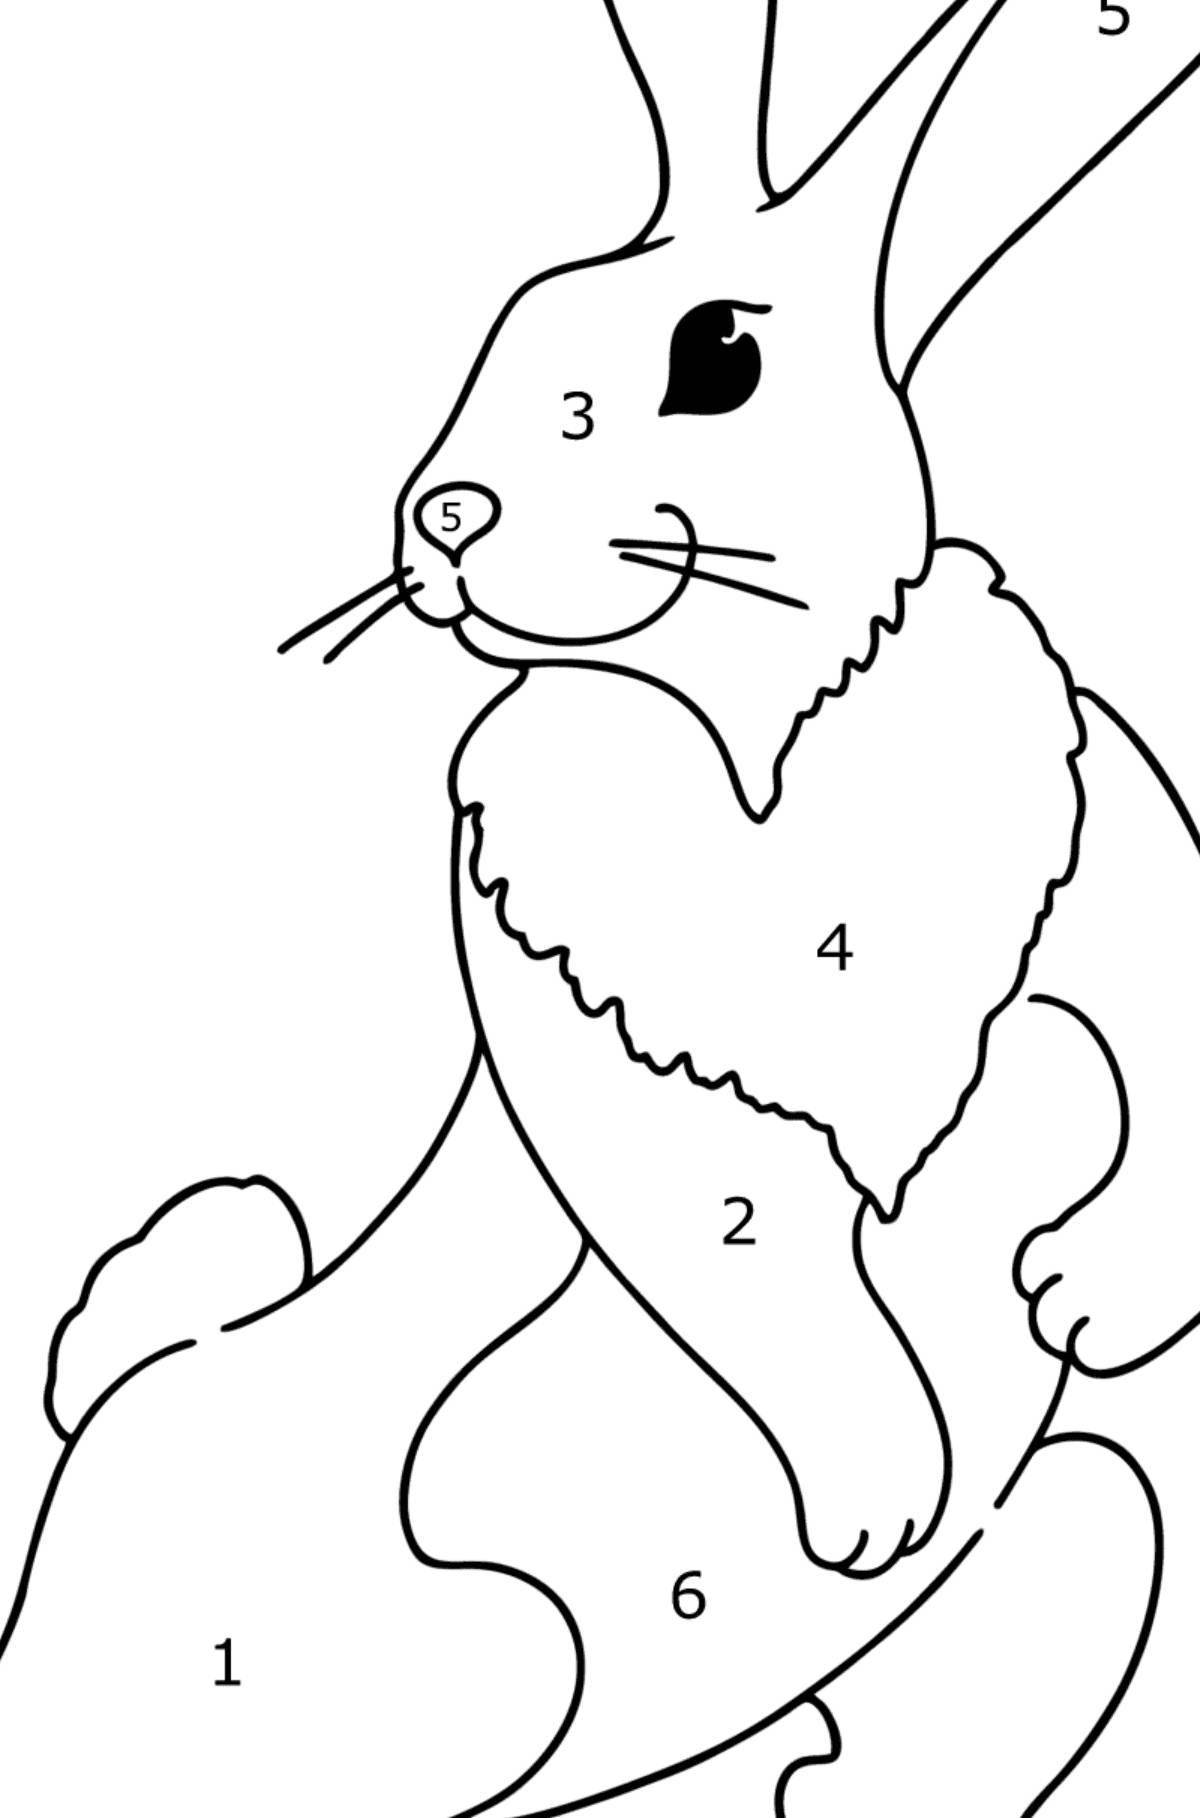 Coloring fun bunny by numbers